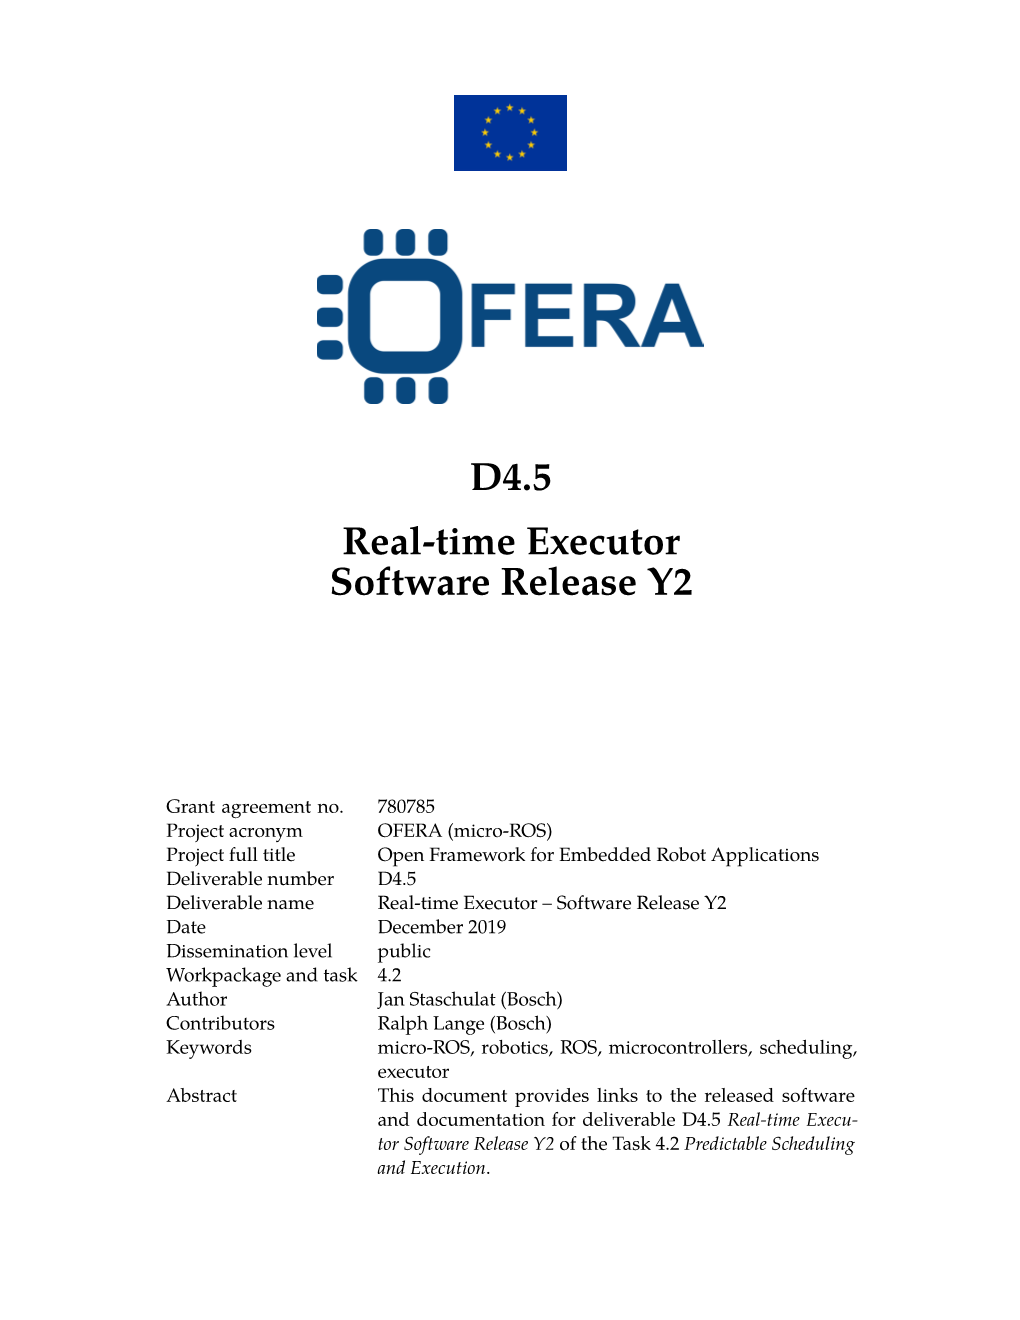 D4.5 Real-Time Executor Software Release Y2